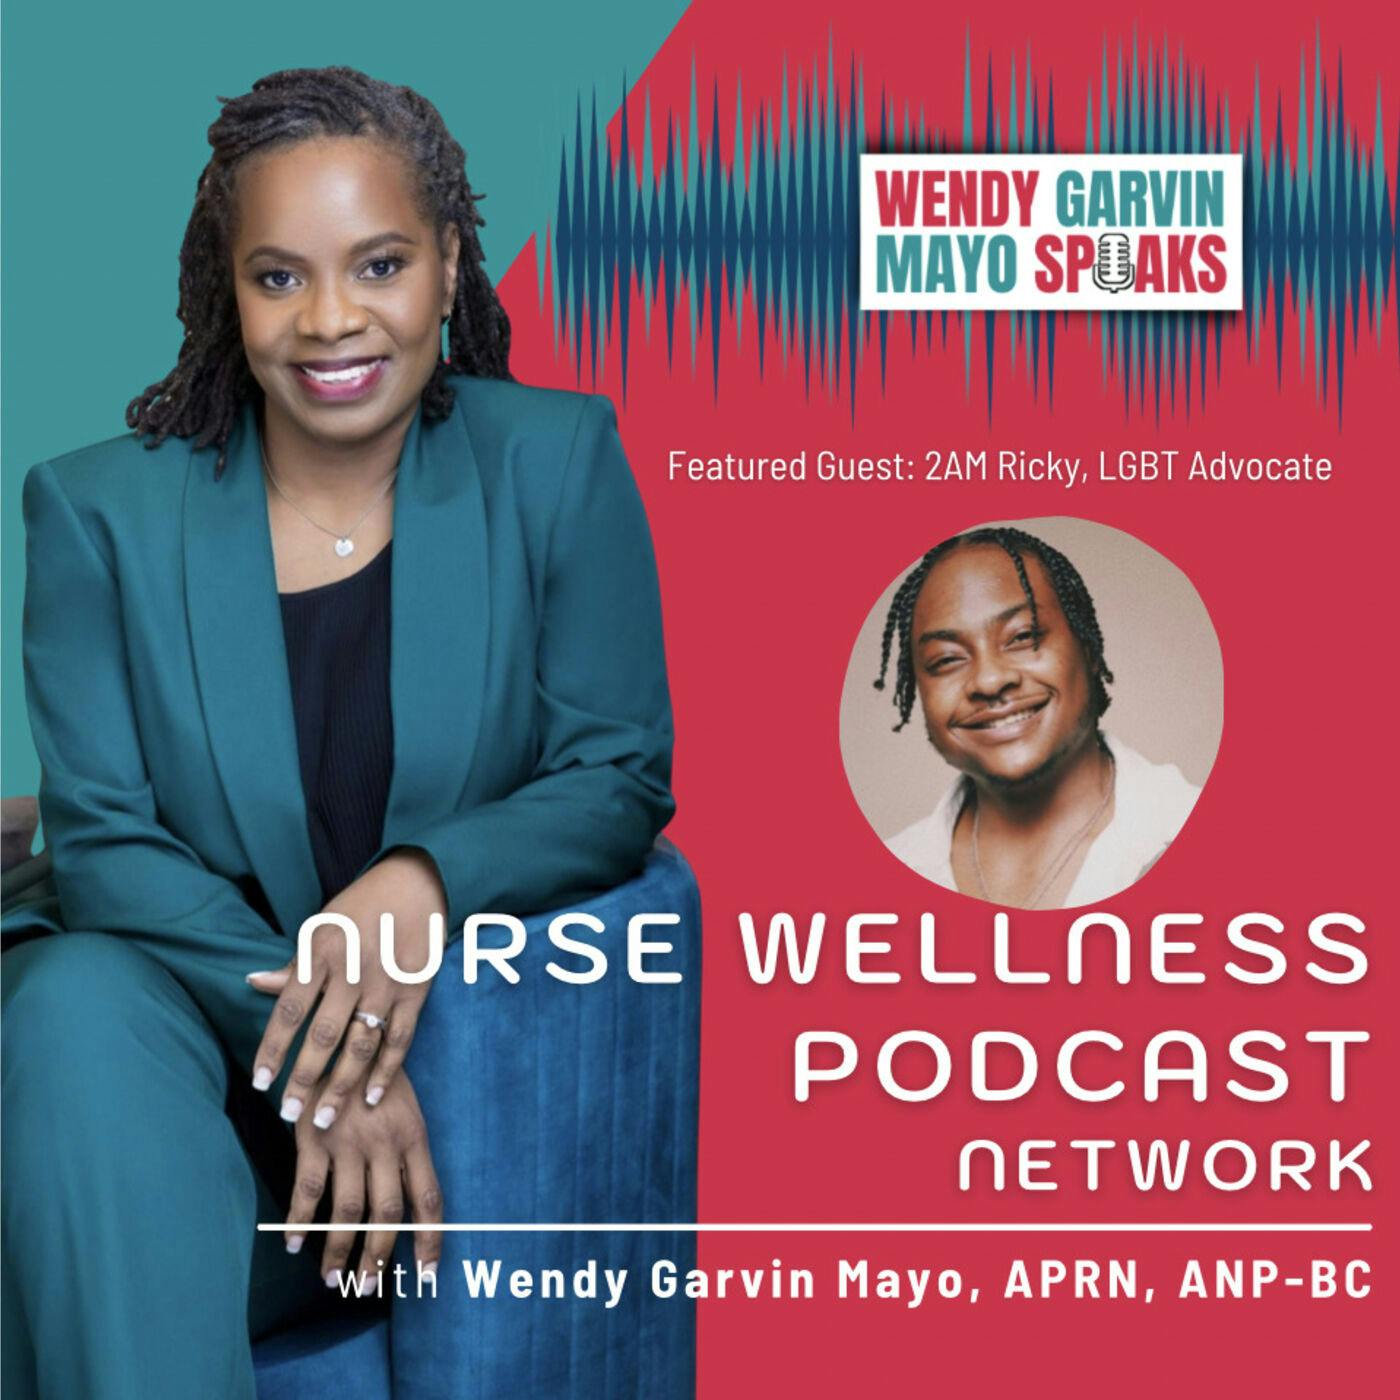 What Impact Does the Healthcare System Have on the Wellness of the LGBTQ Community? Wendy with 2AM Ricky, LGBTQ Advocate